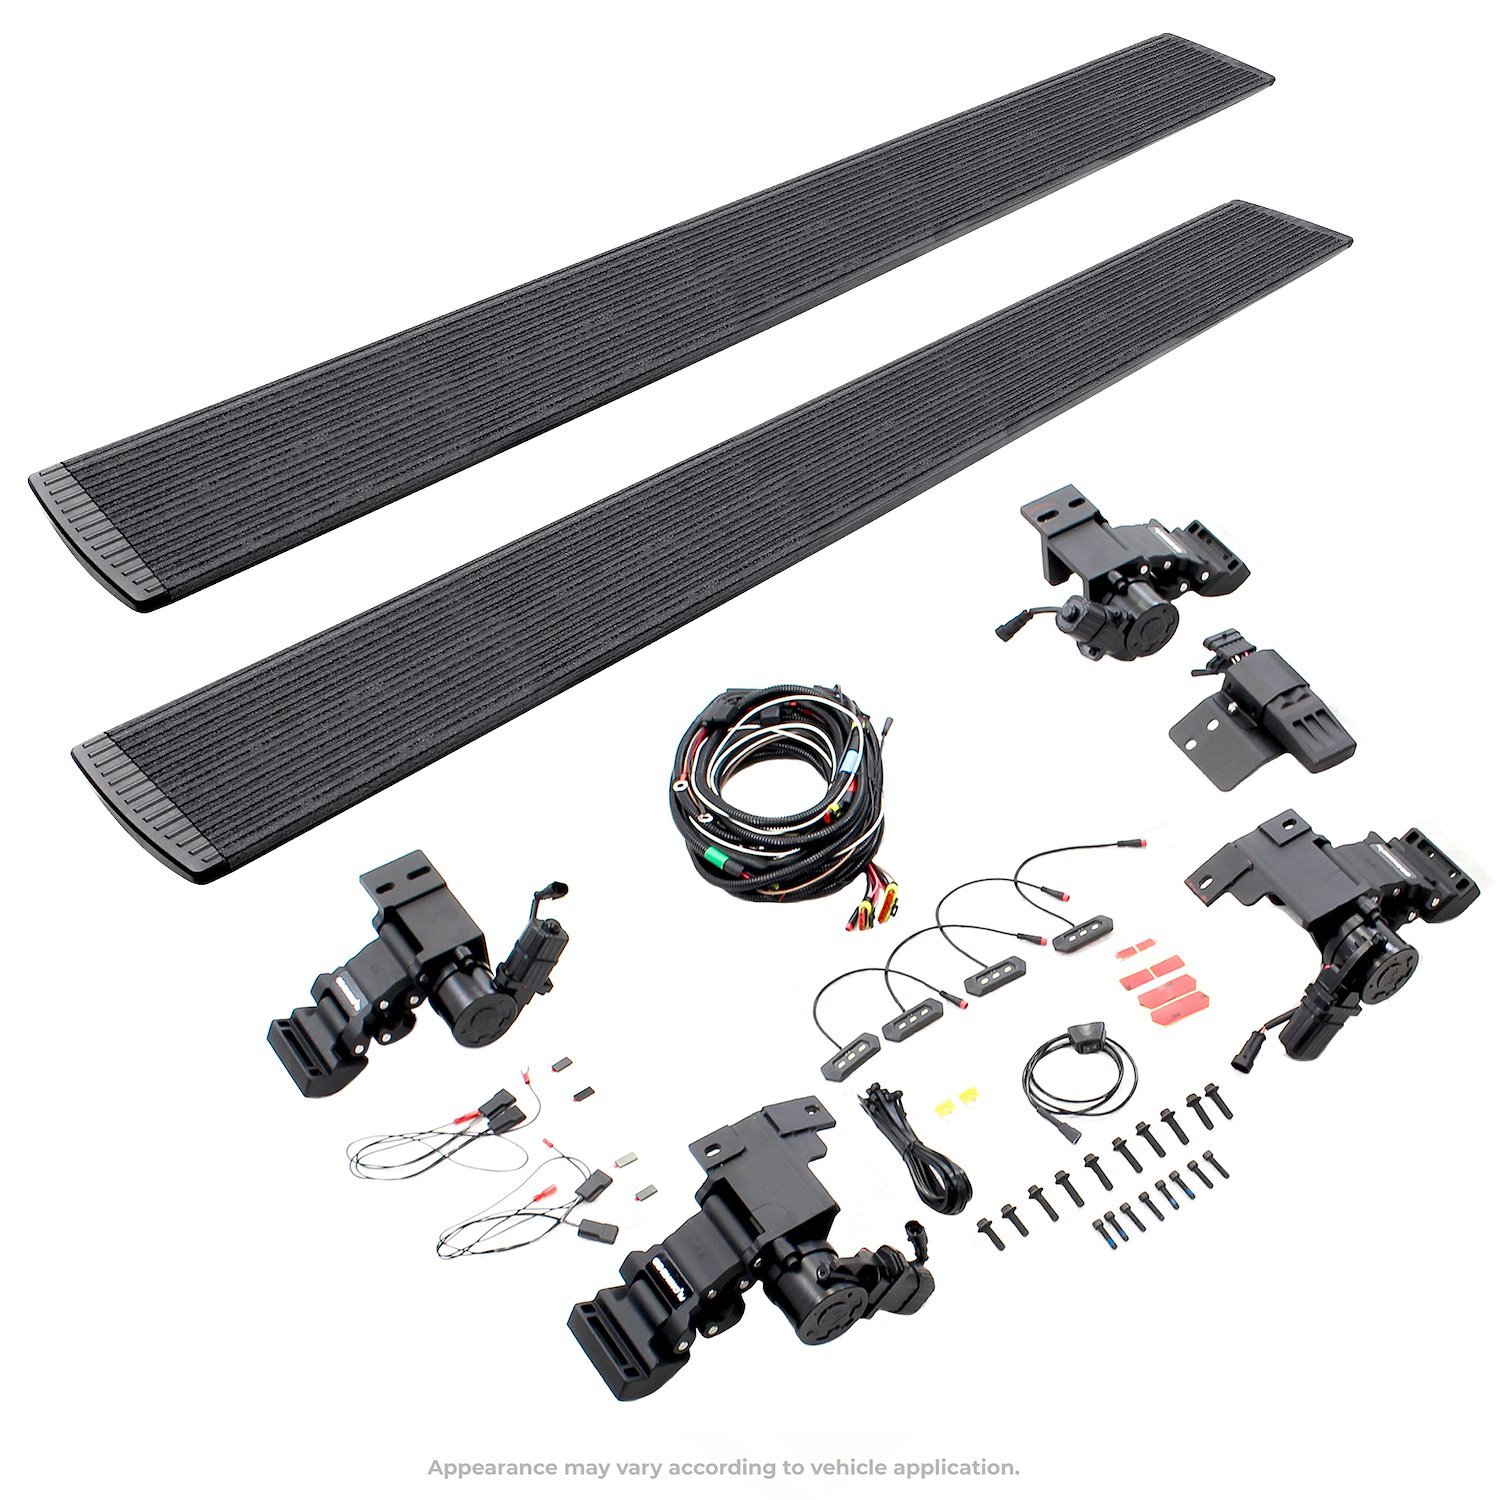 E1 Electric Running Board Kit Fits Select GMC Canyon Crew Cab Pickup - Gasoline & Diesel